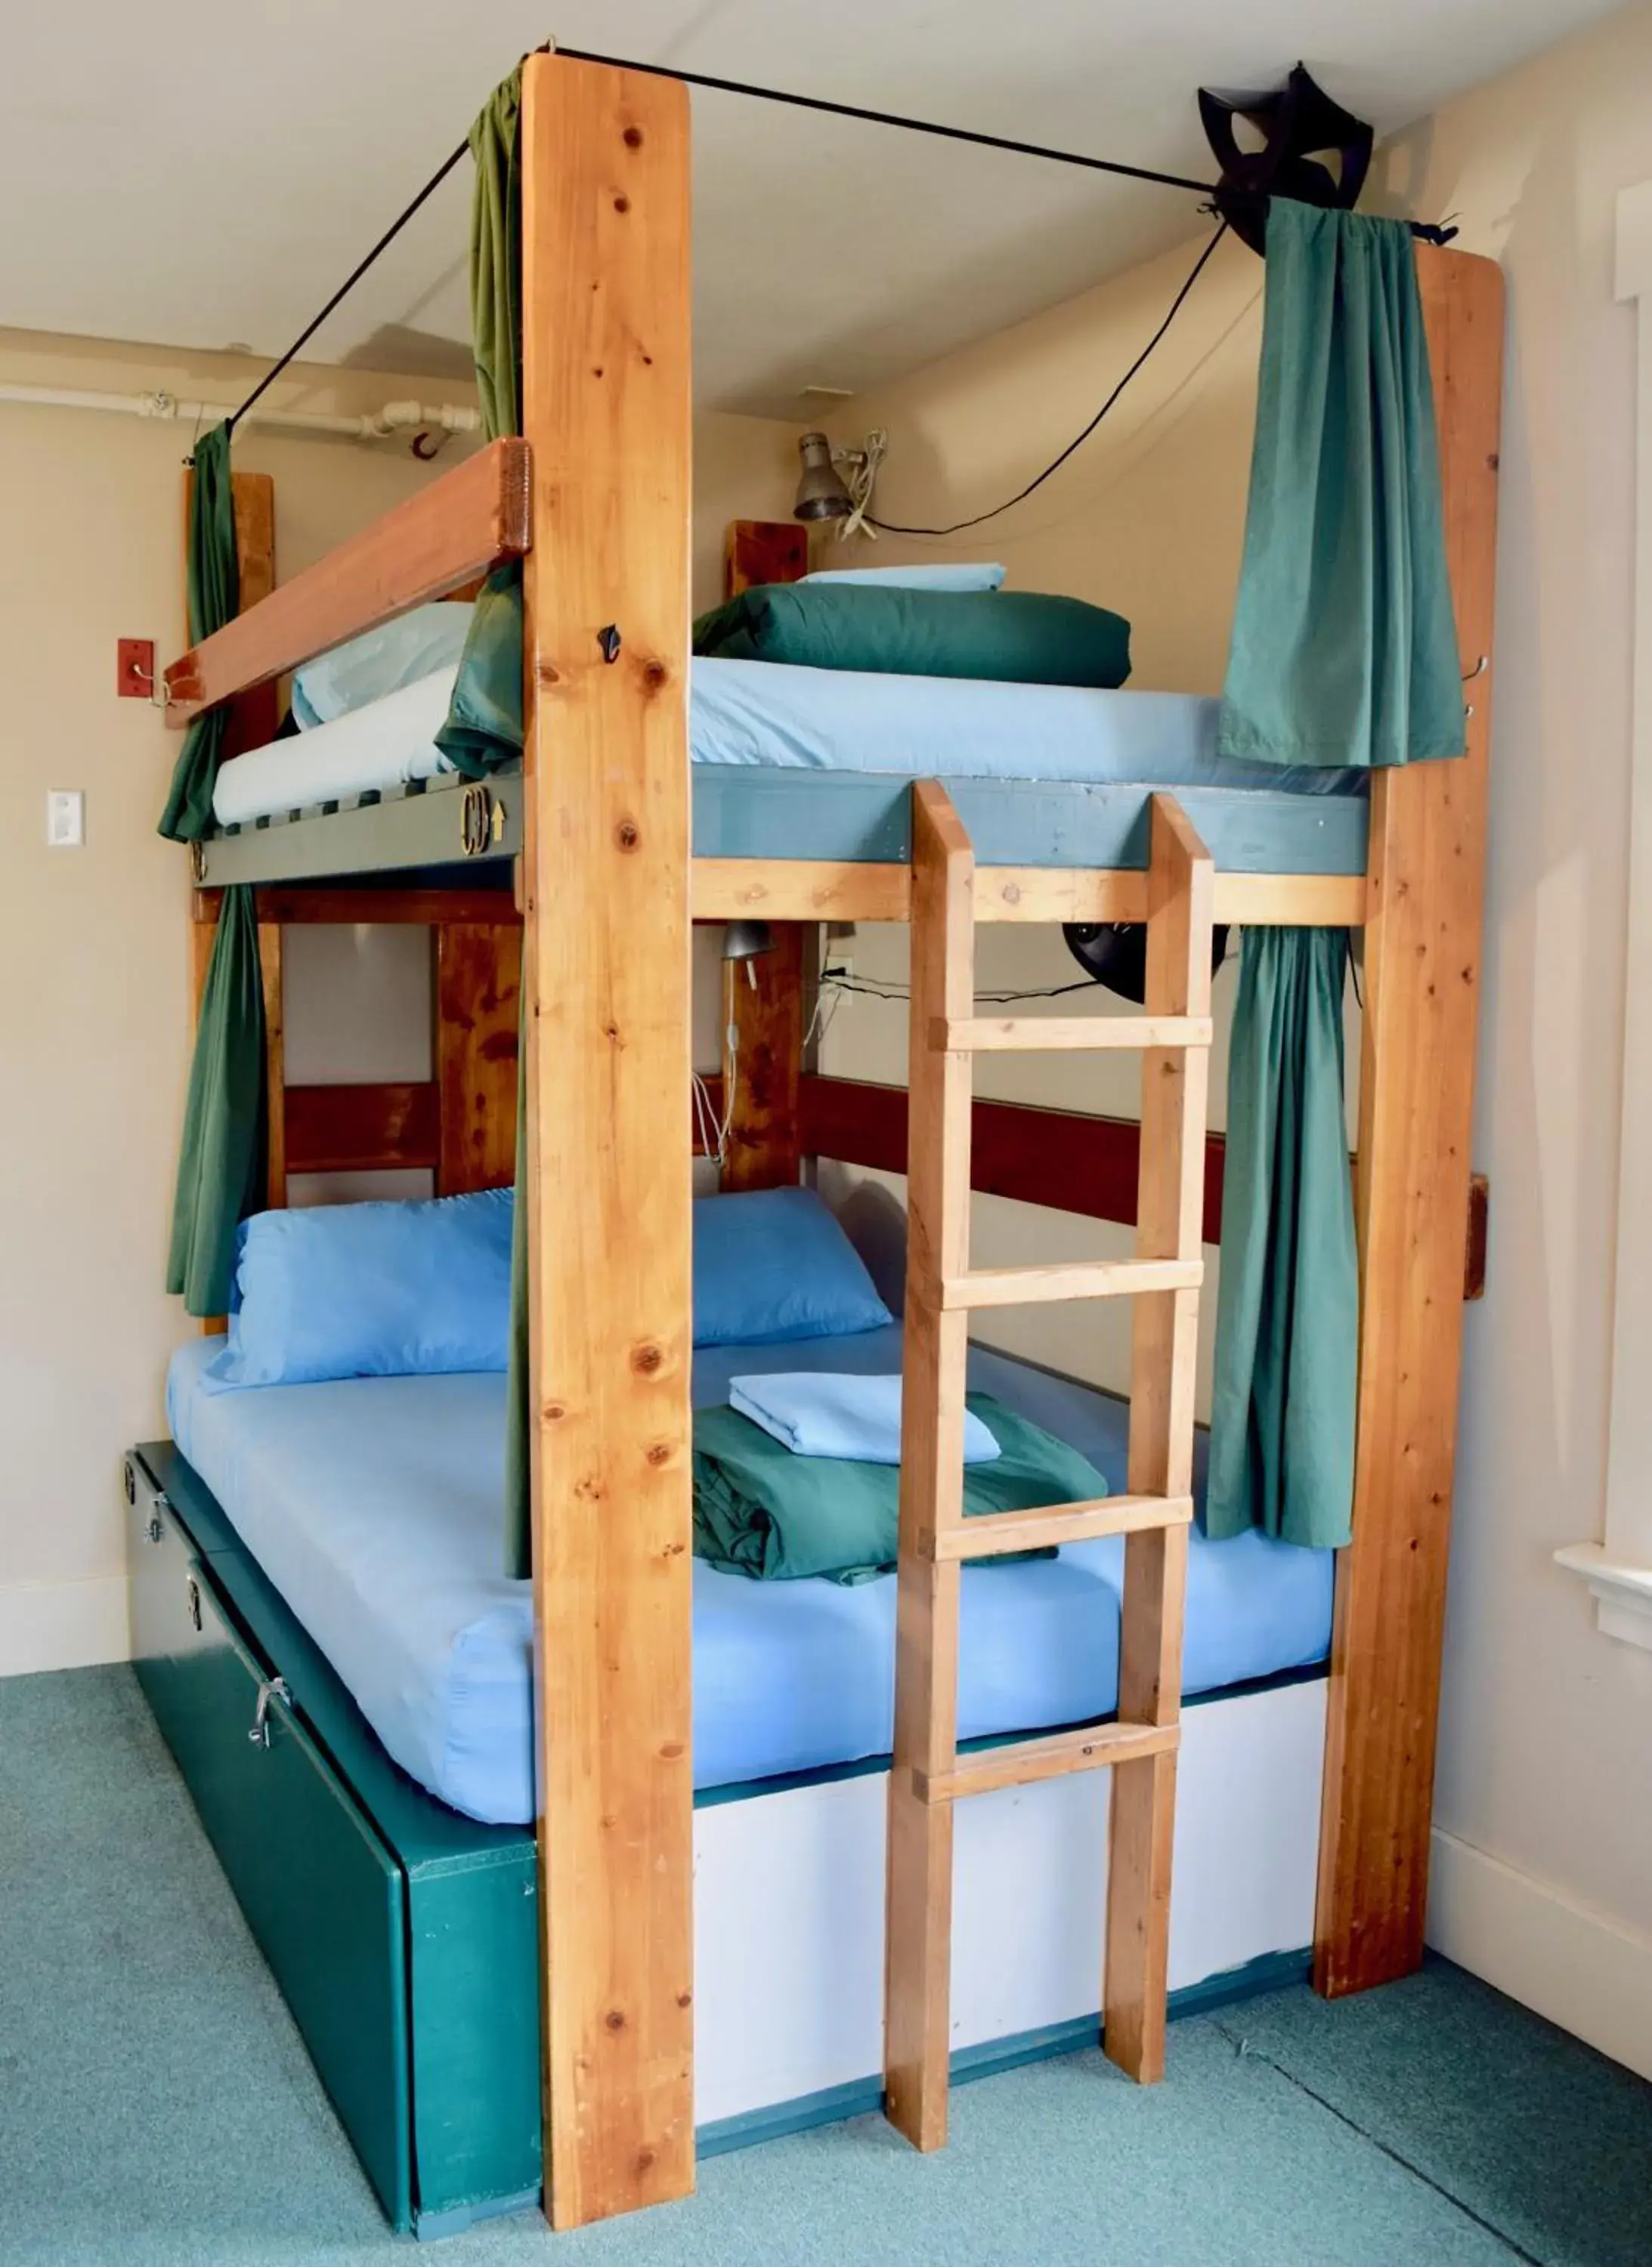 Photo of the whole room, Bunk Bed in Green Tortoise Hostel Seattle